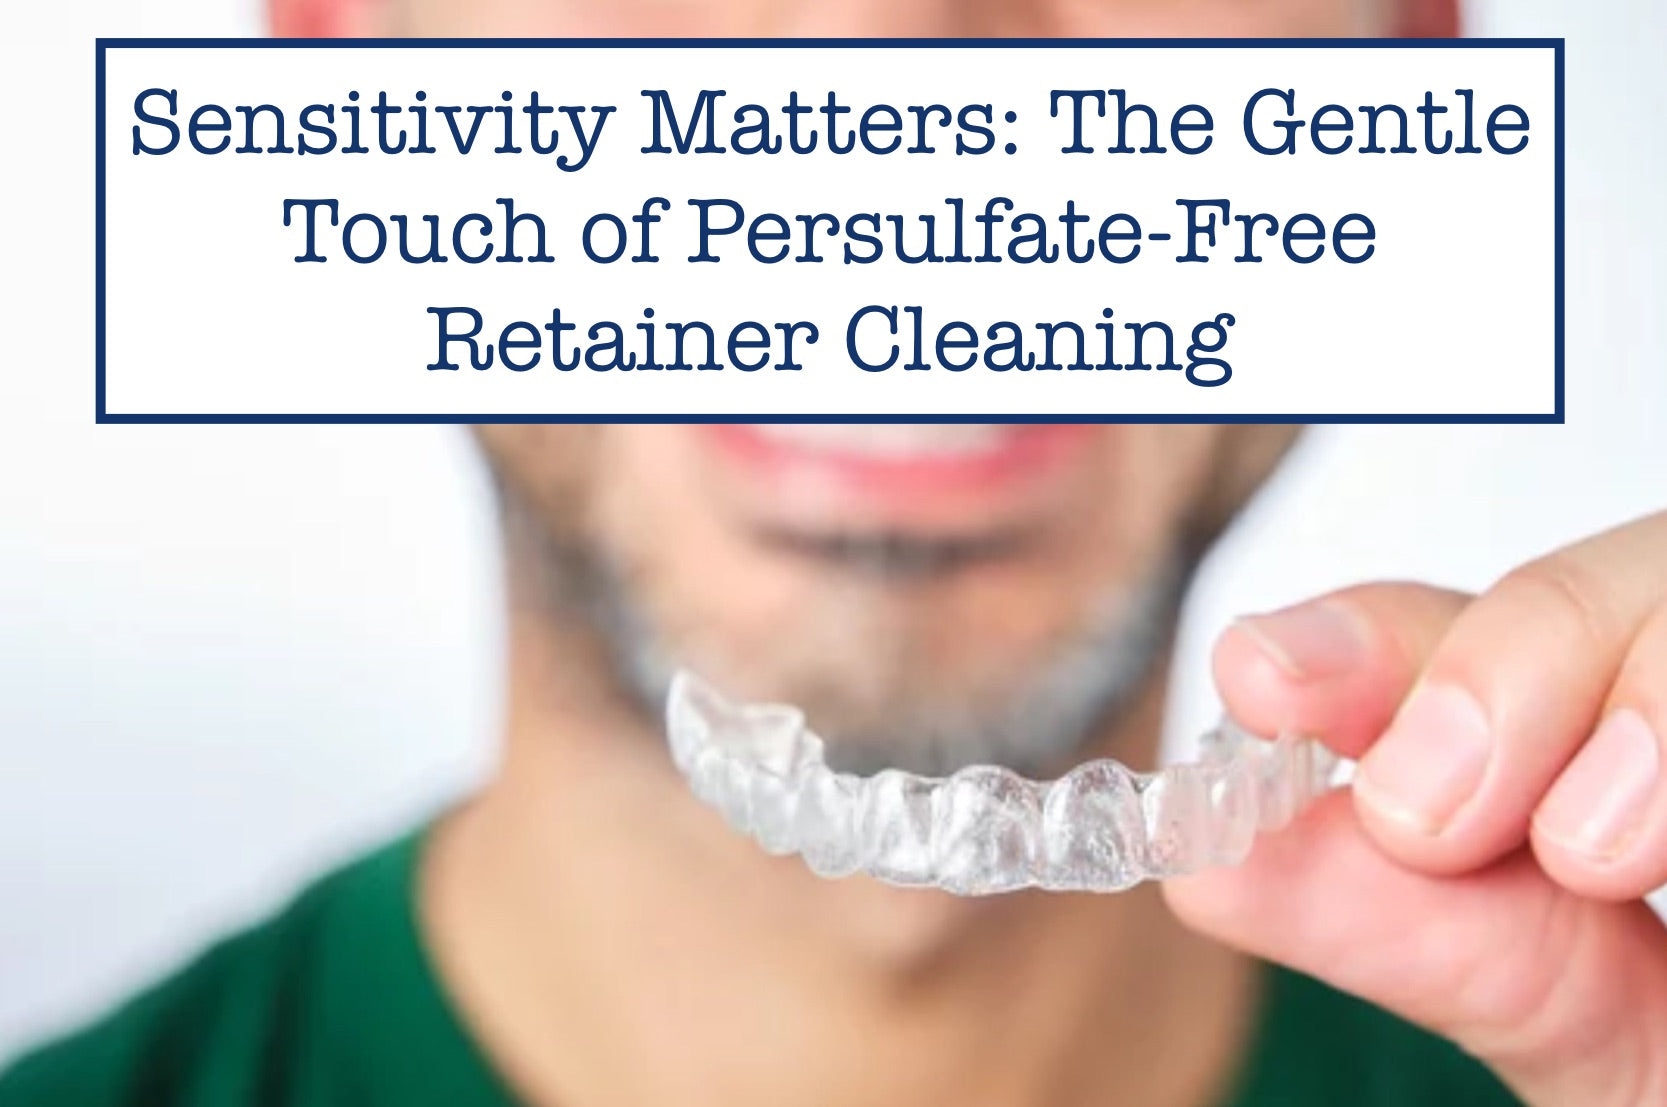 Sensitivity Matters: The Gentle Touch of Persulfate-Free Retainer Cleaning